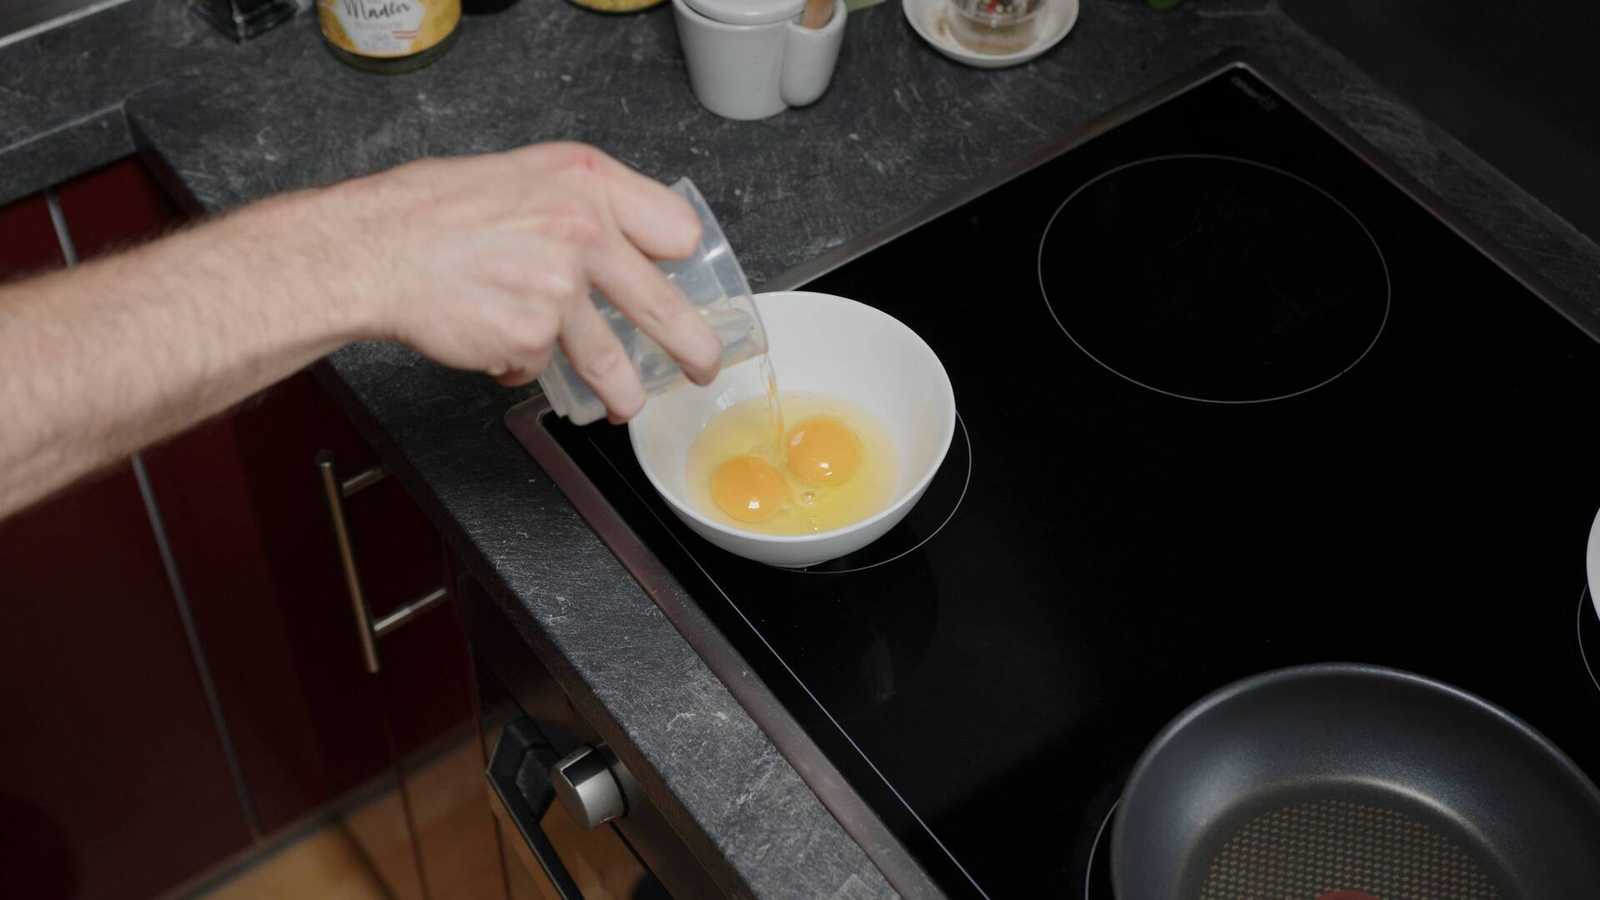 Splash of water being added to the eggs